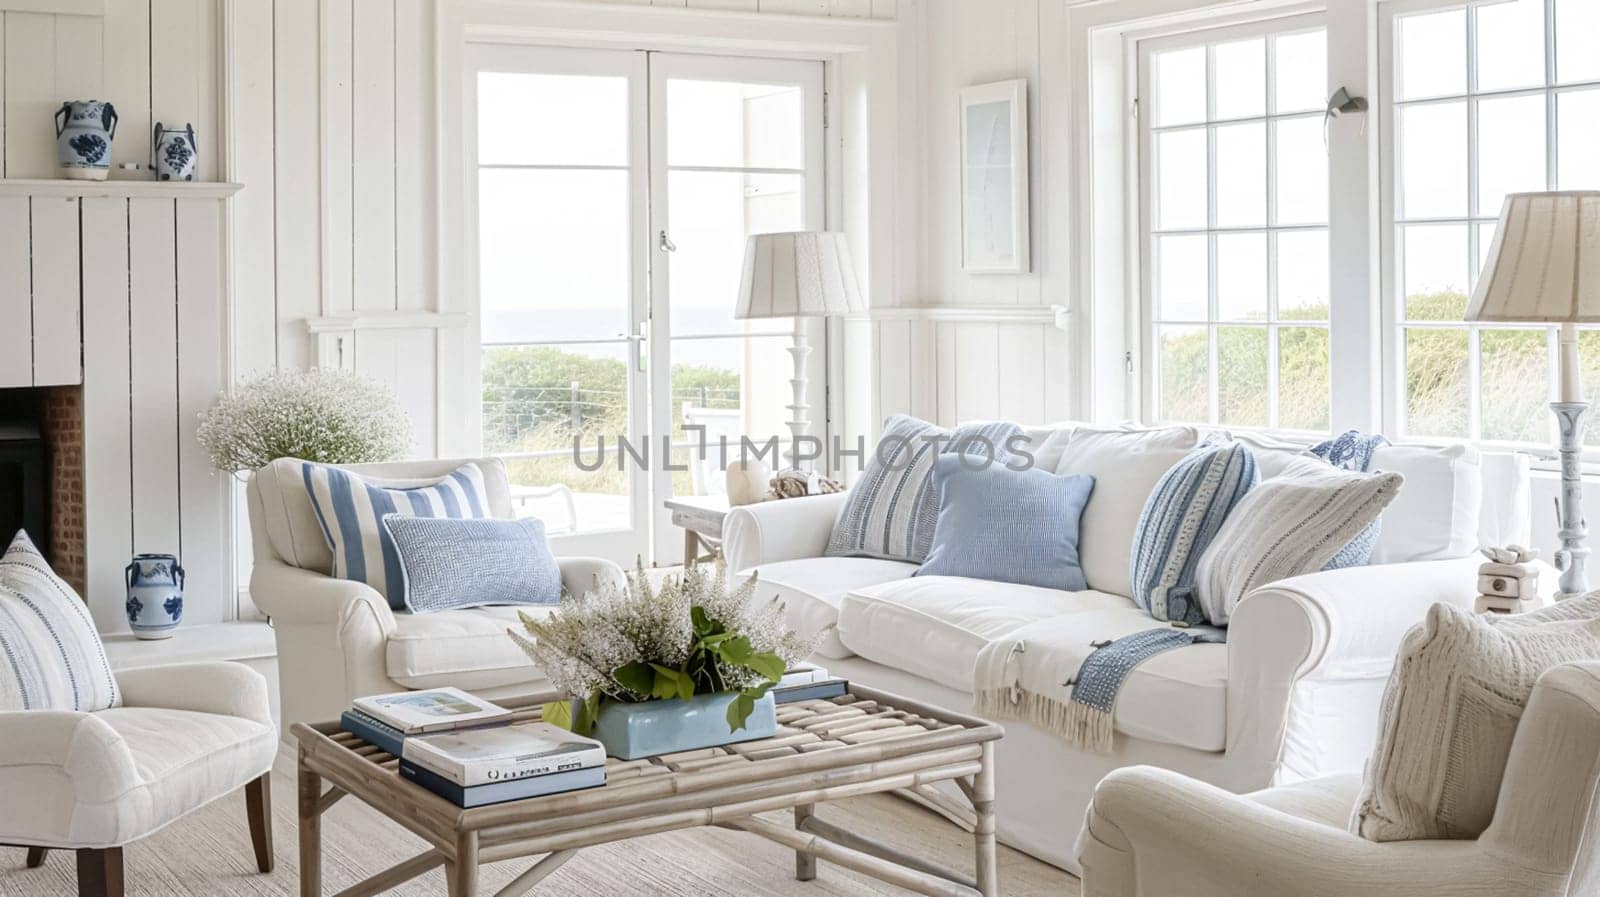 Interior of a living room with white walls, sofa and cushions. Sitting room in coastal cottage with sea view. Luxury lounge room